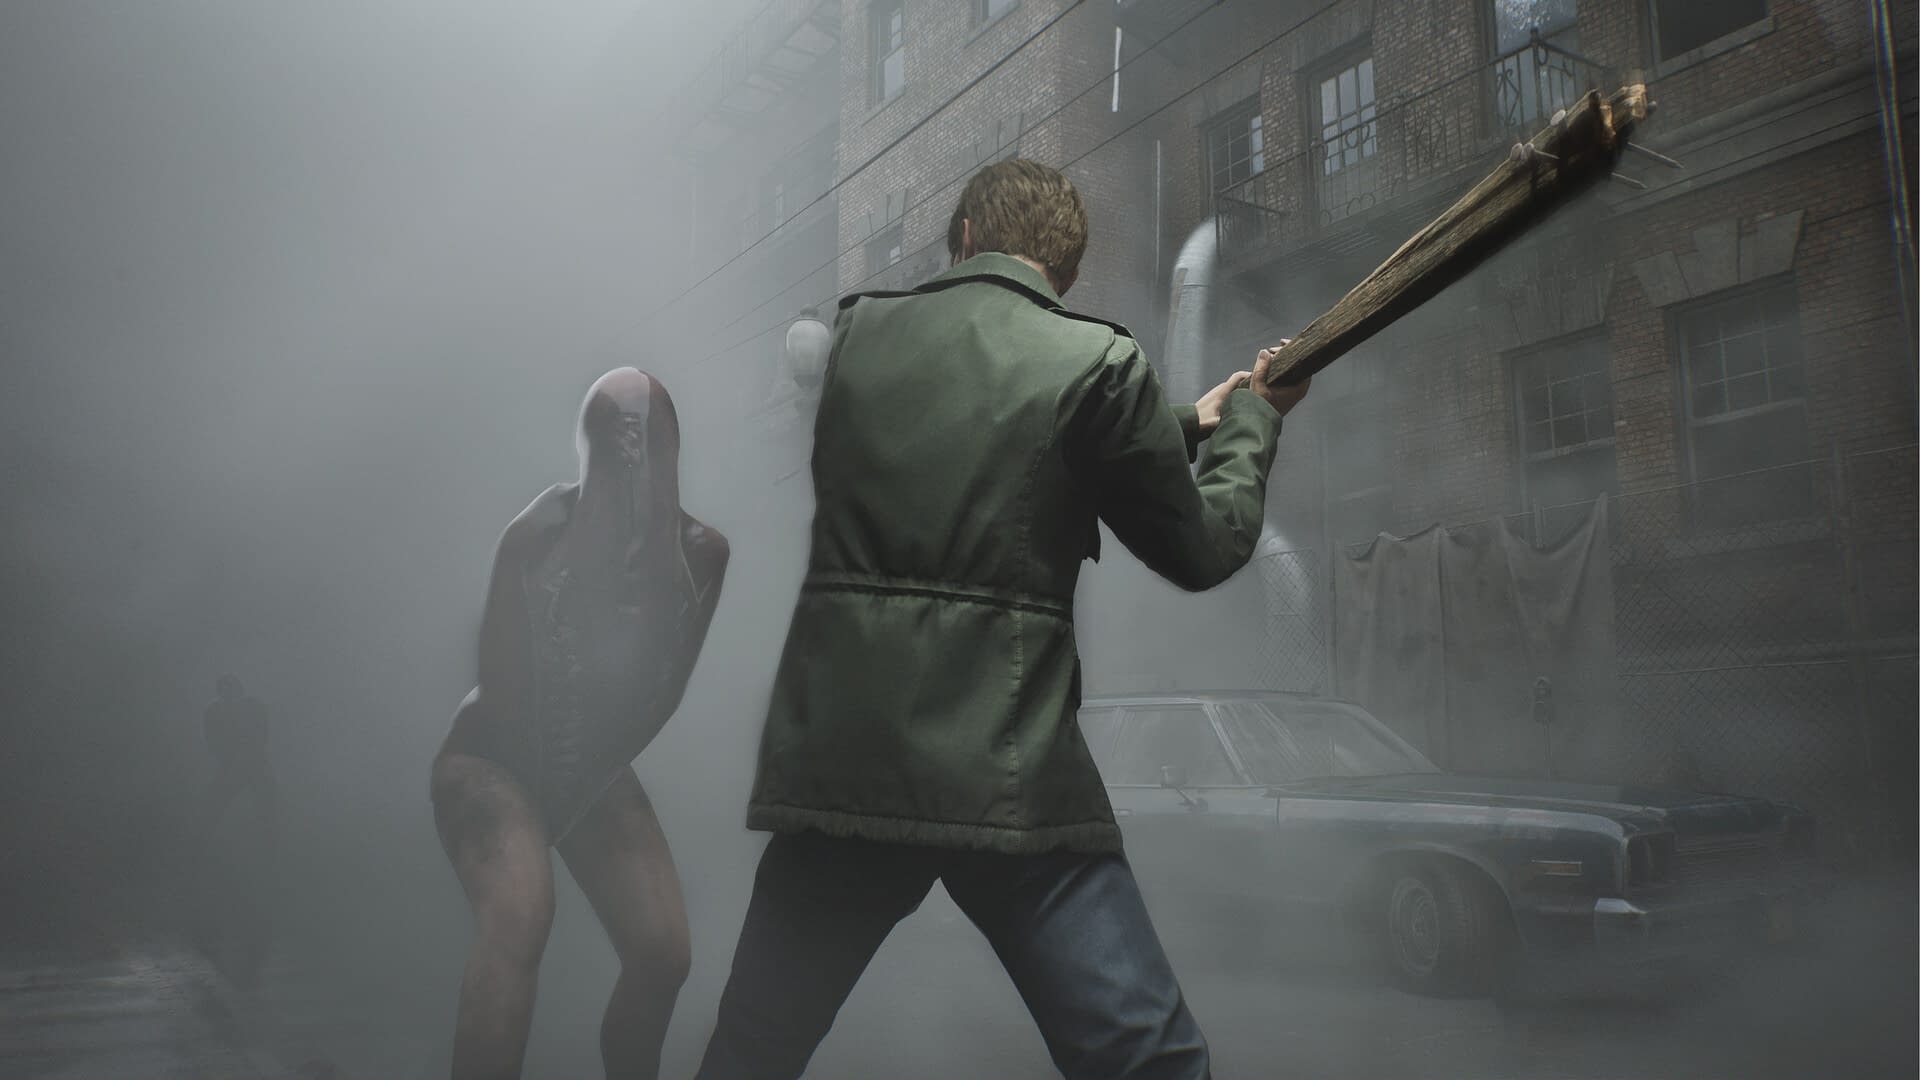 Silent Hill 2 Remake Ranked in Korea: Can Be Near Outlet